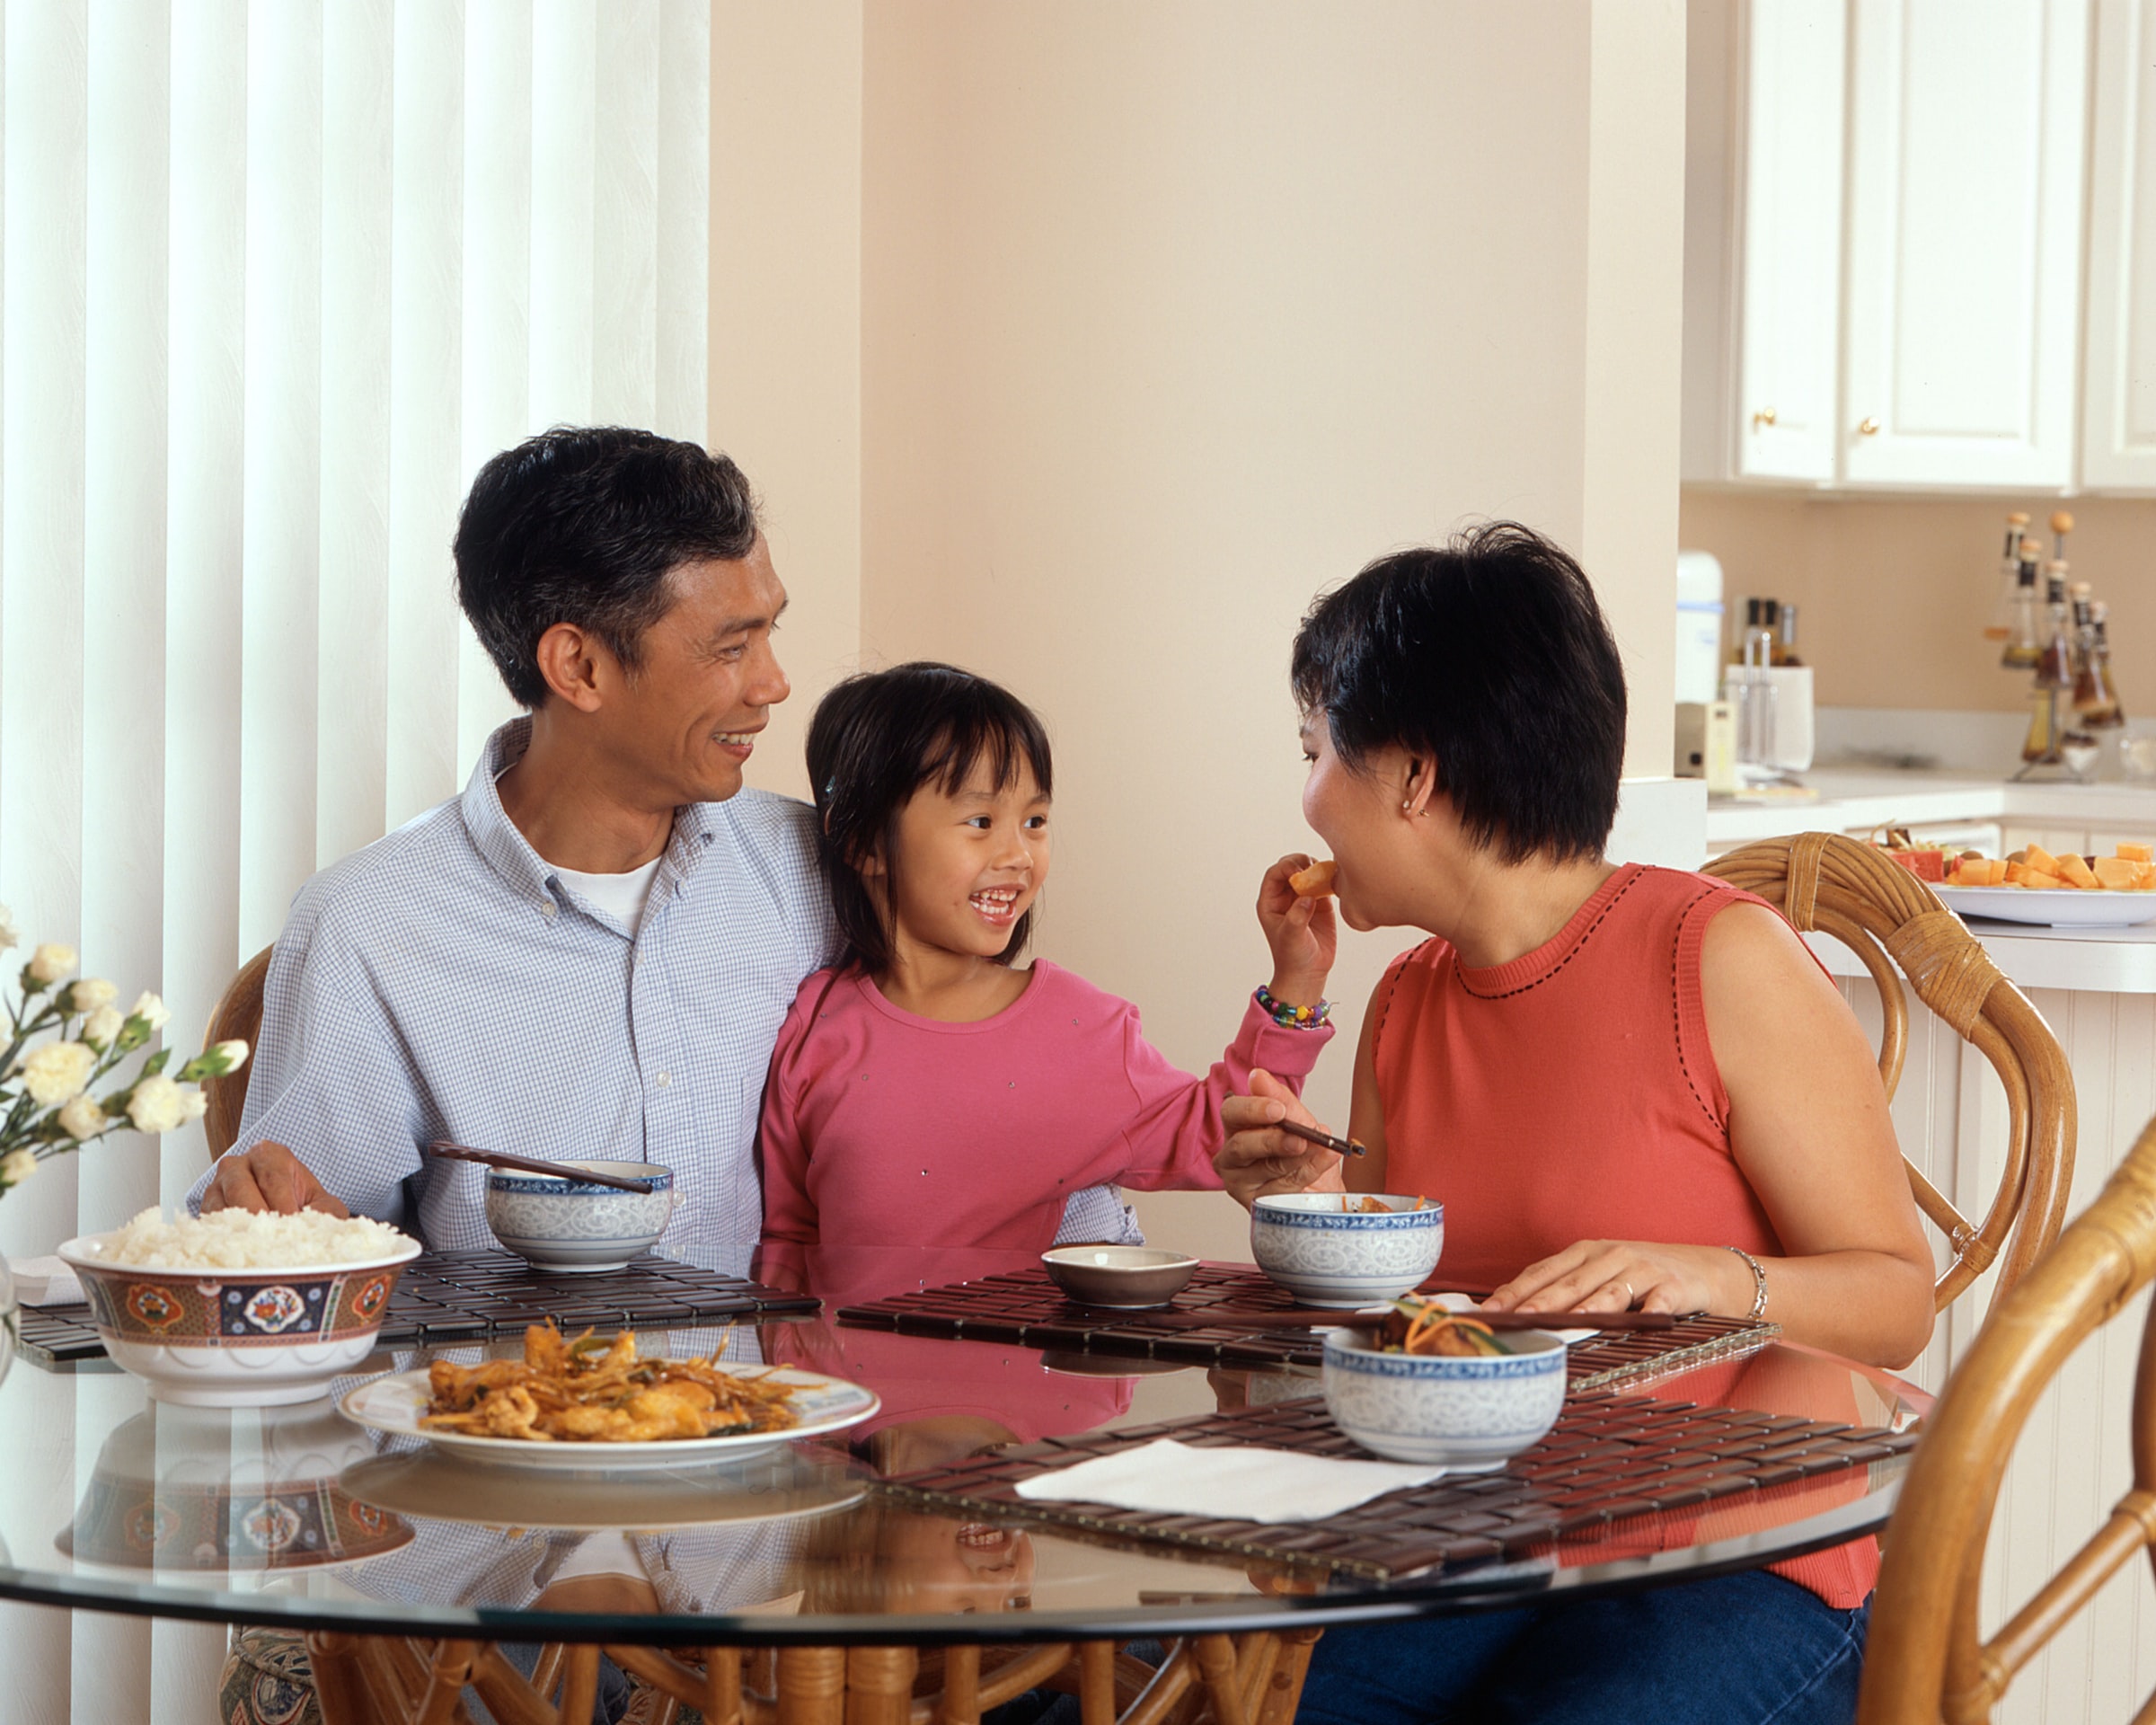 Photo of a family sitting at a table eating a meal.